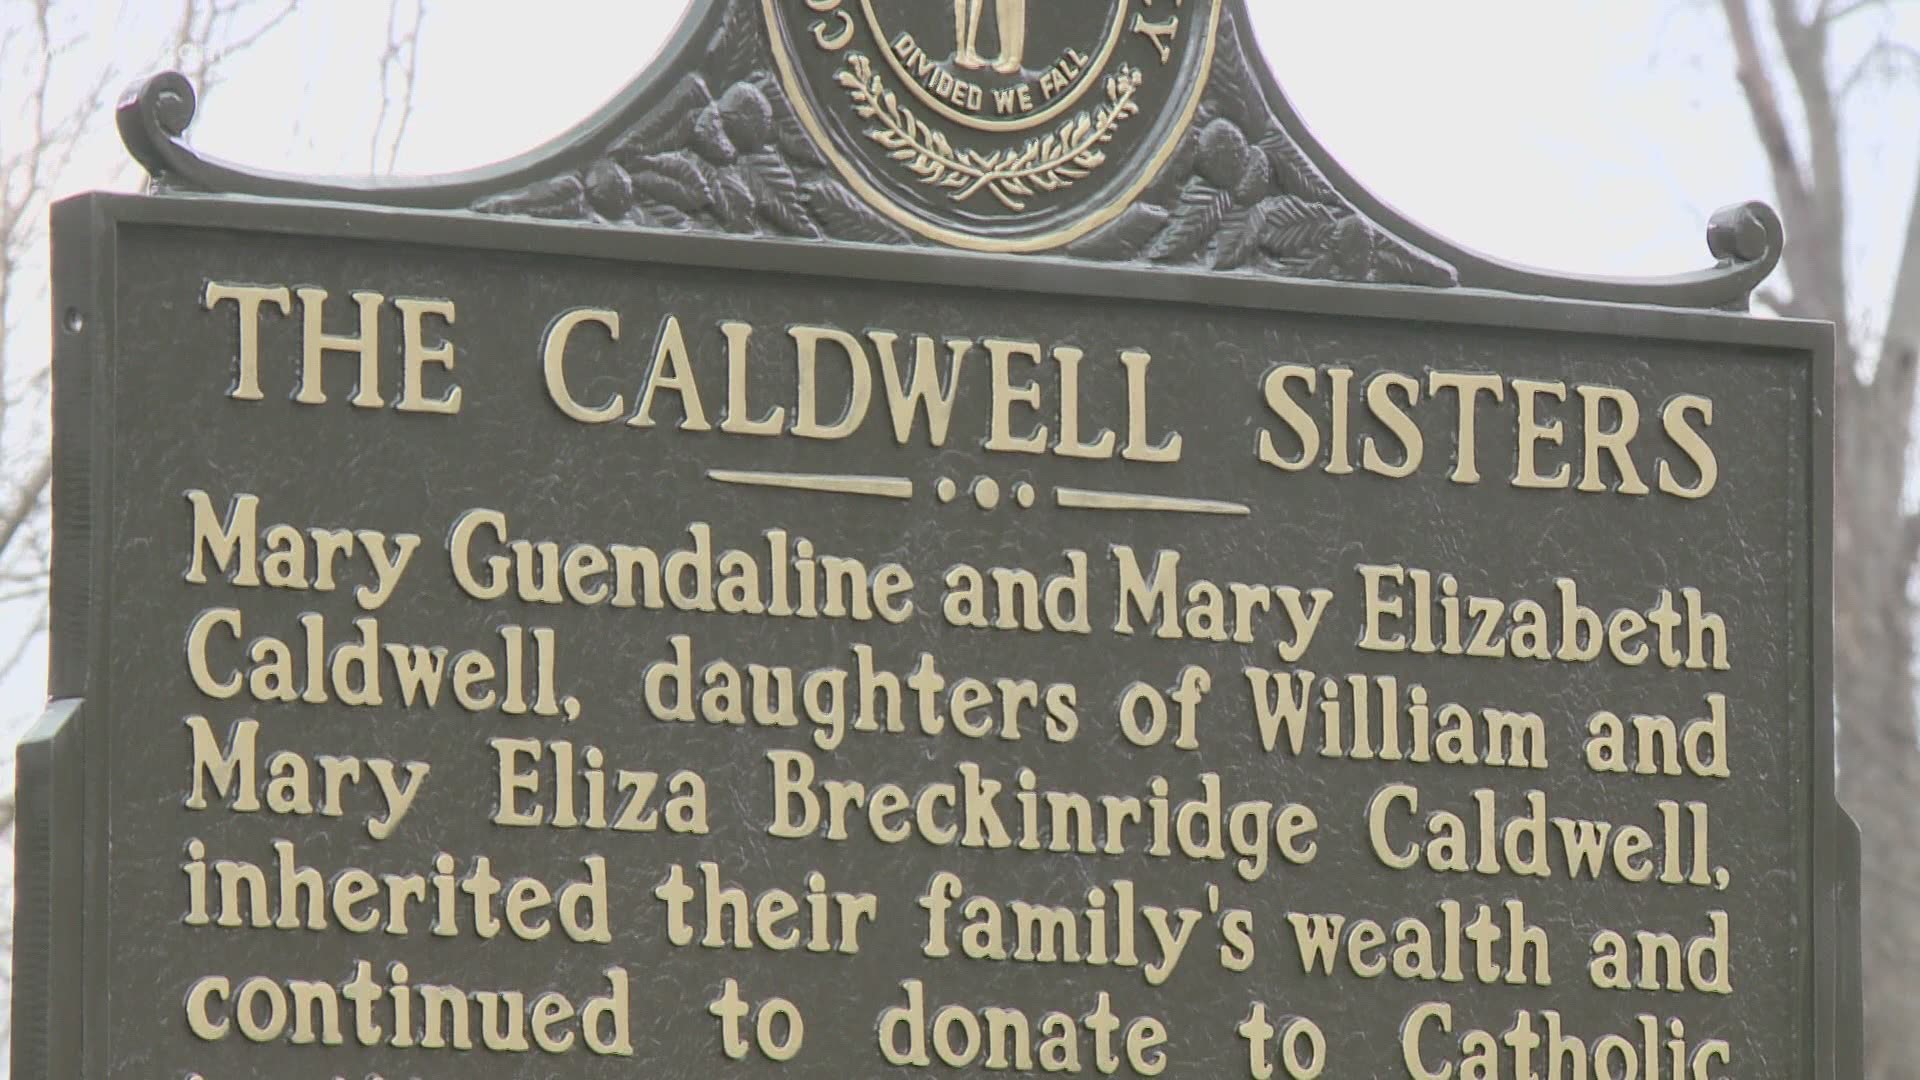 The sisters known for their charity and ties to Louisville purchased the land in what we now know as Shelby Park today.